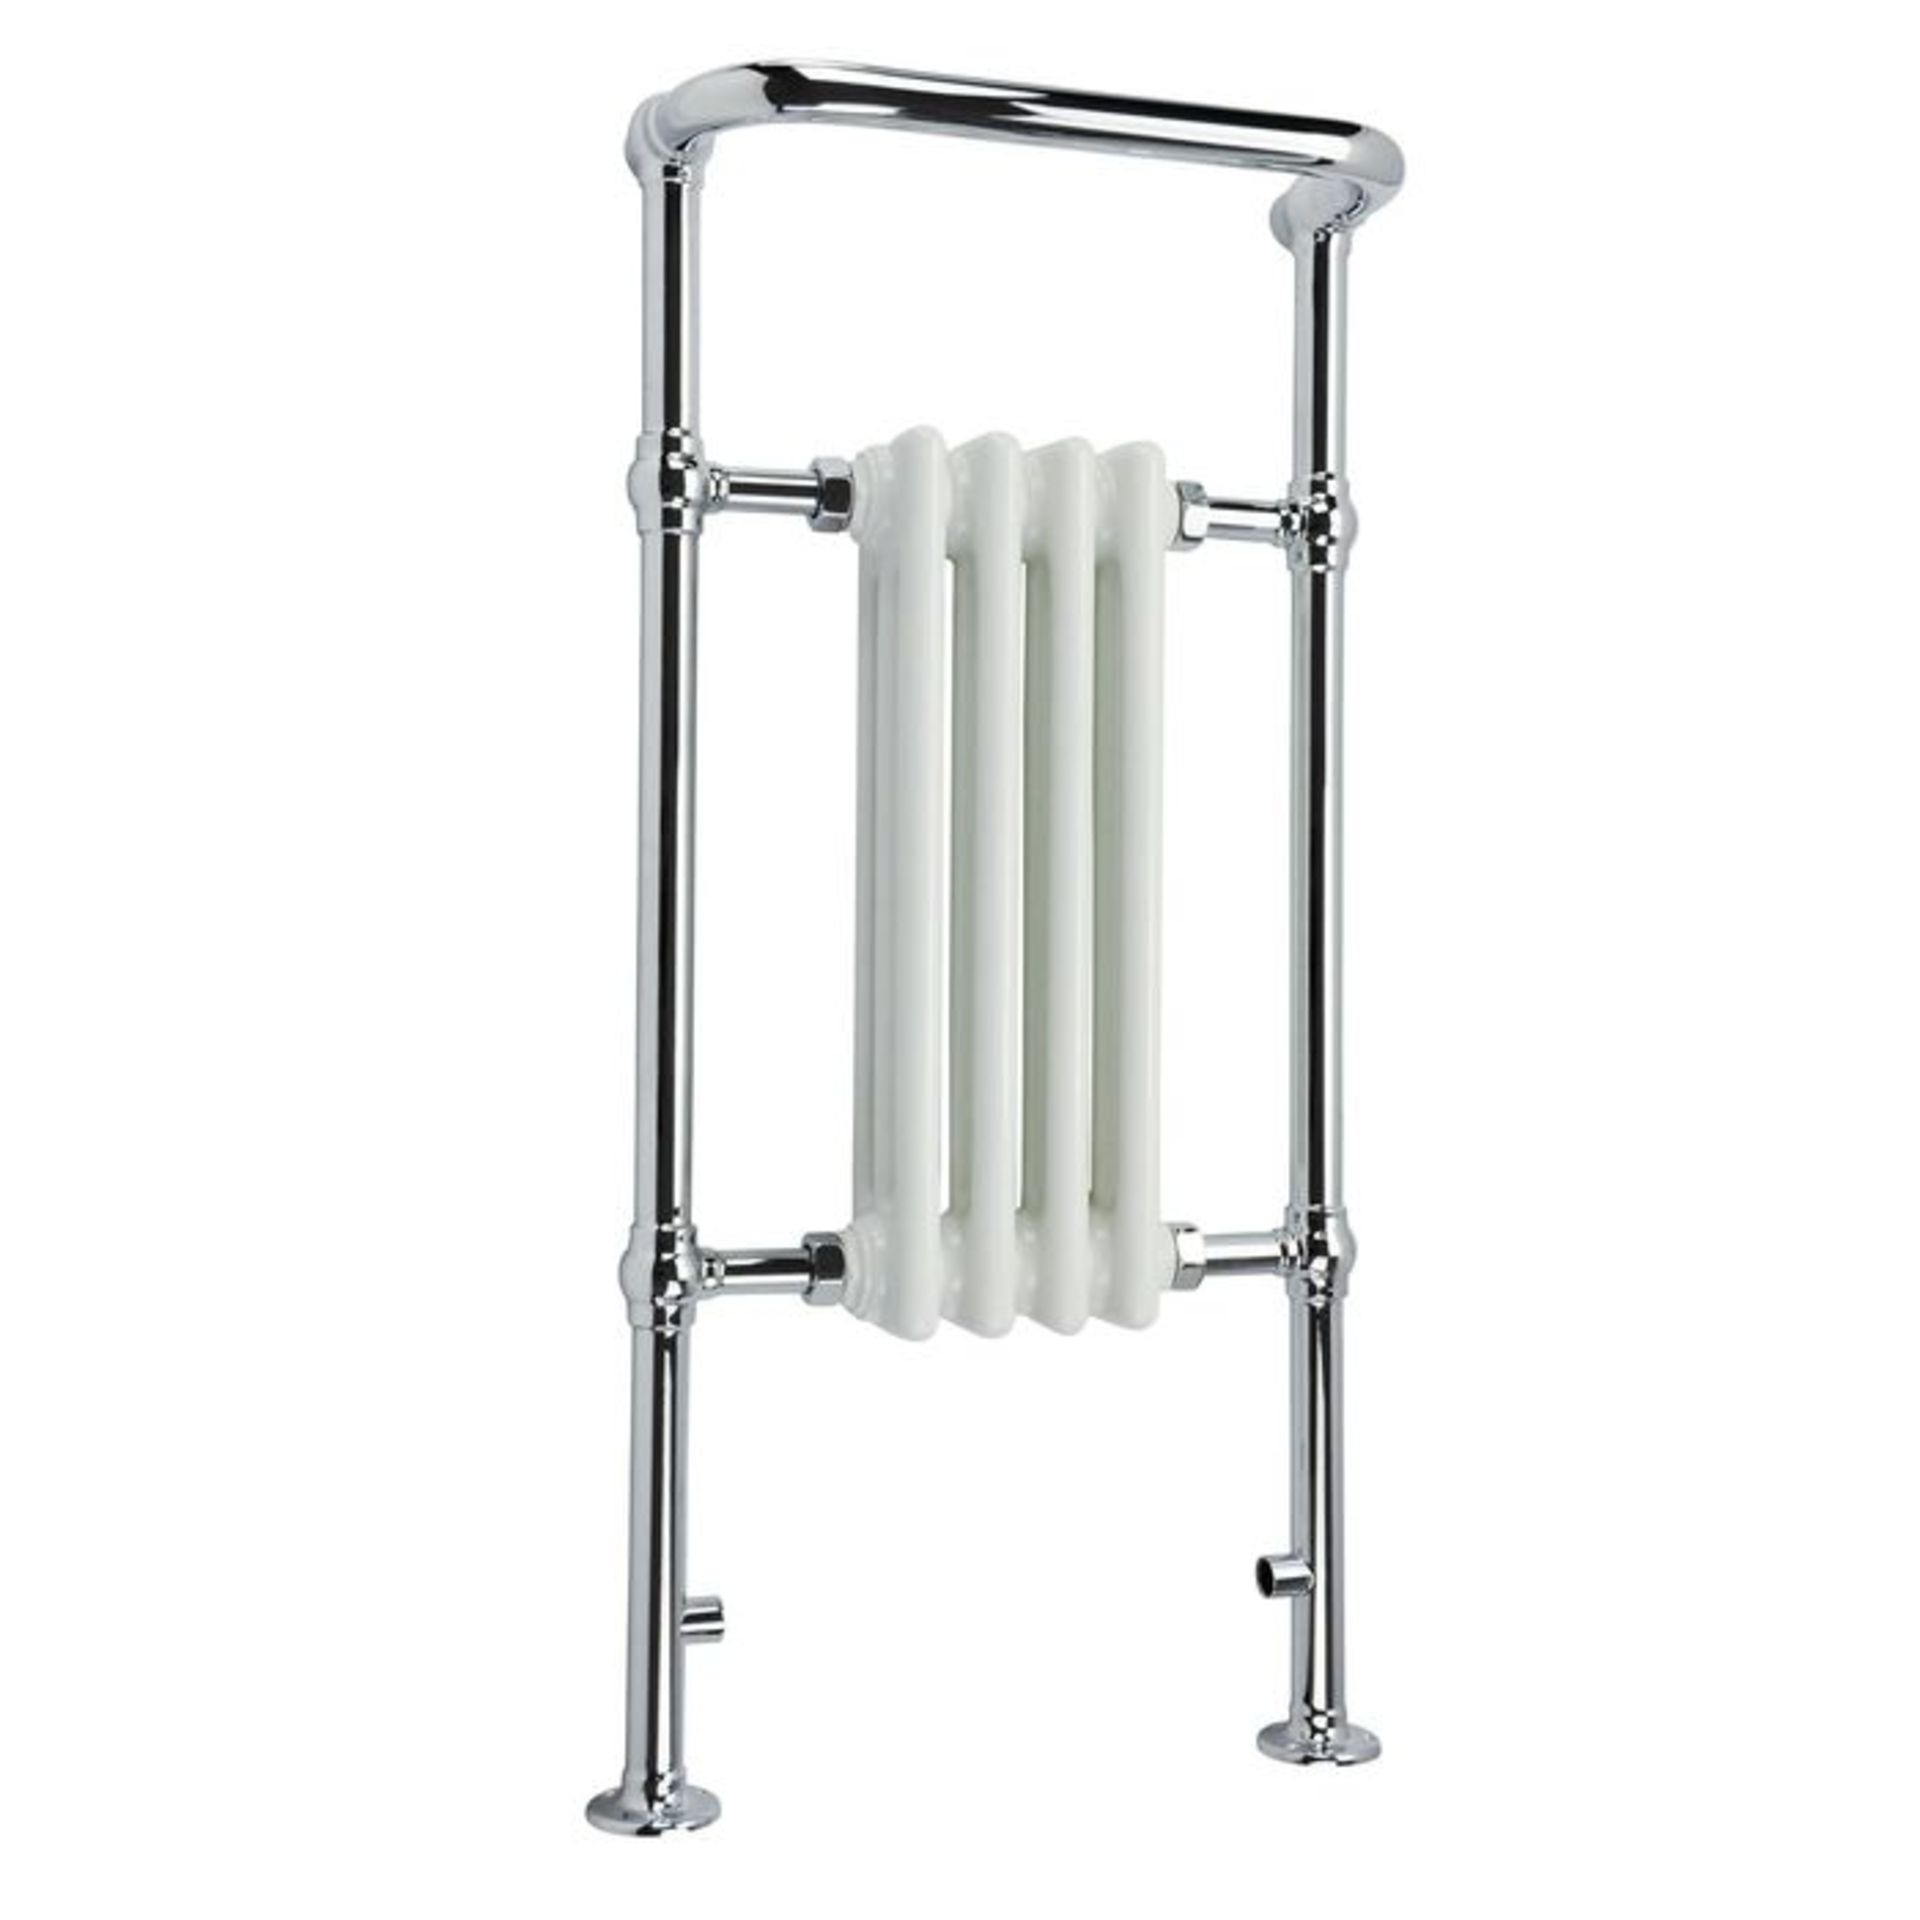 (SP11) 952x479mm Small Traditional White Towel Rail Radiator - Cambridge.We love this because it - Image 3 of 3